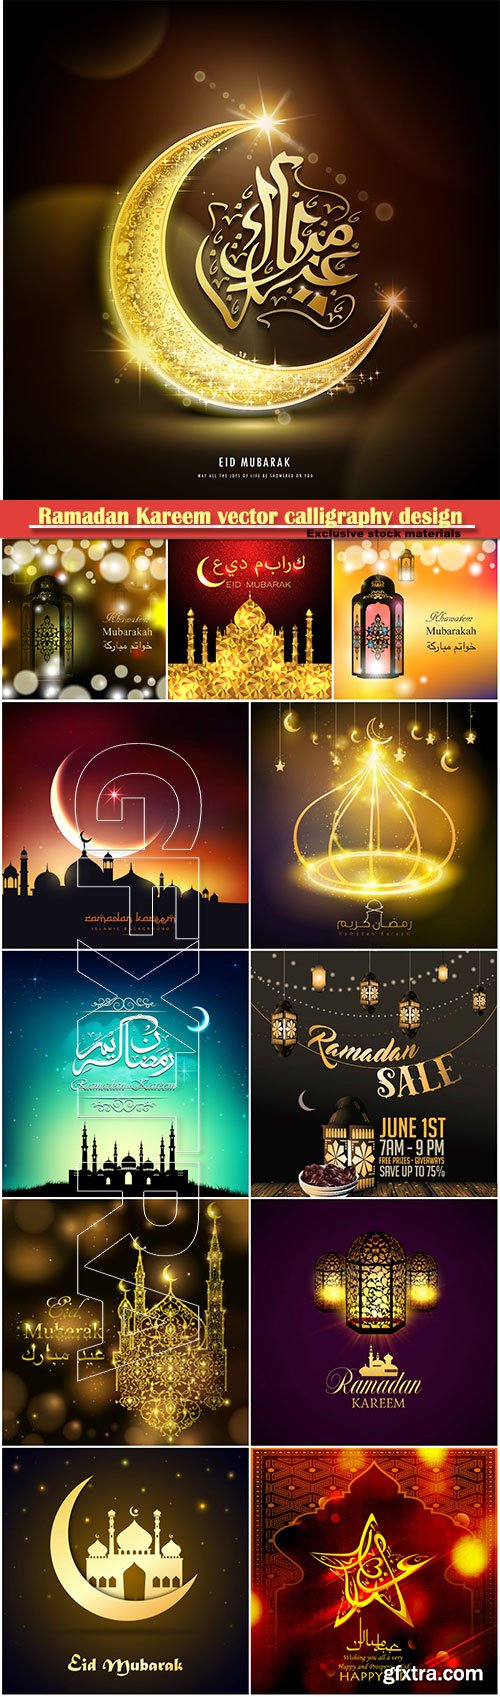 Ramadan Kareem vector calligraphy design with decorative floral pattern, mosque silhouette, crescent and glittering islamic background # 25